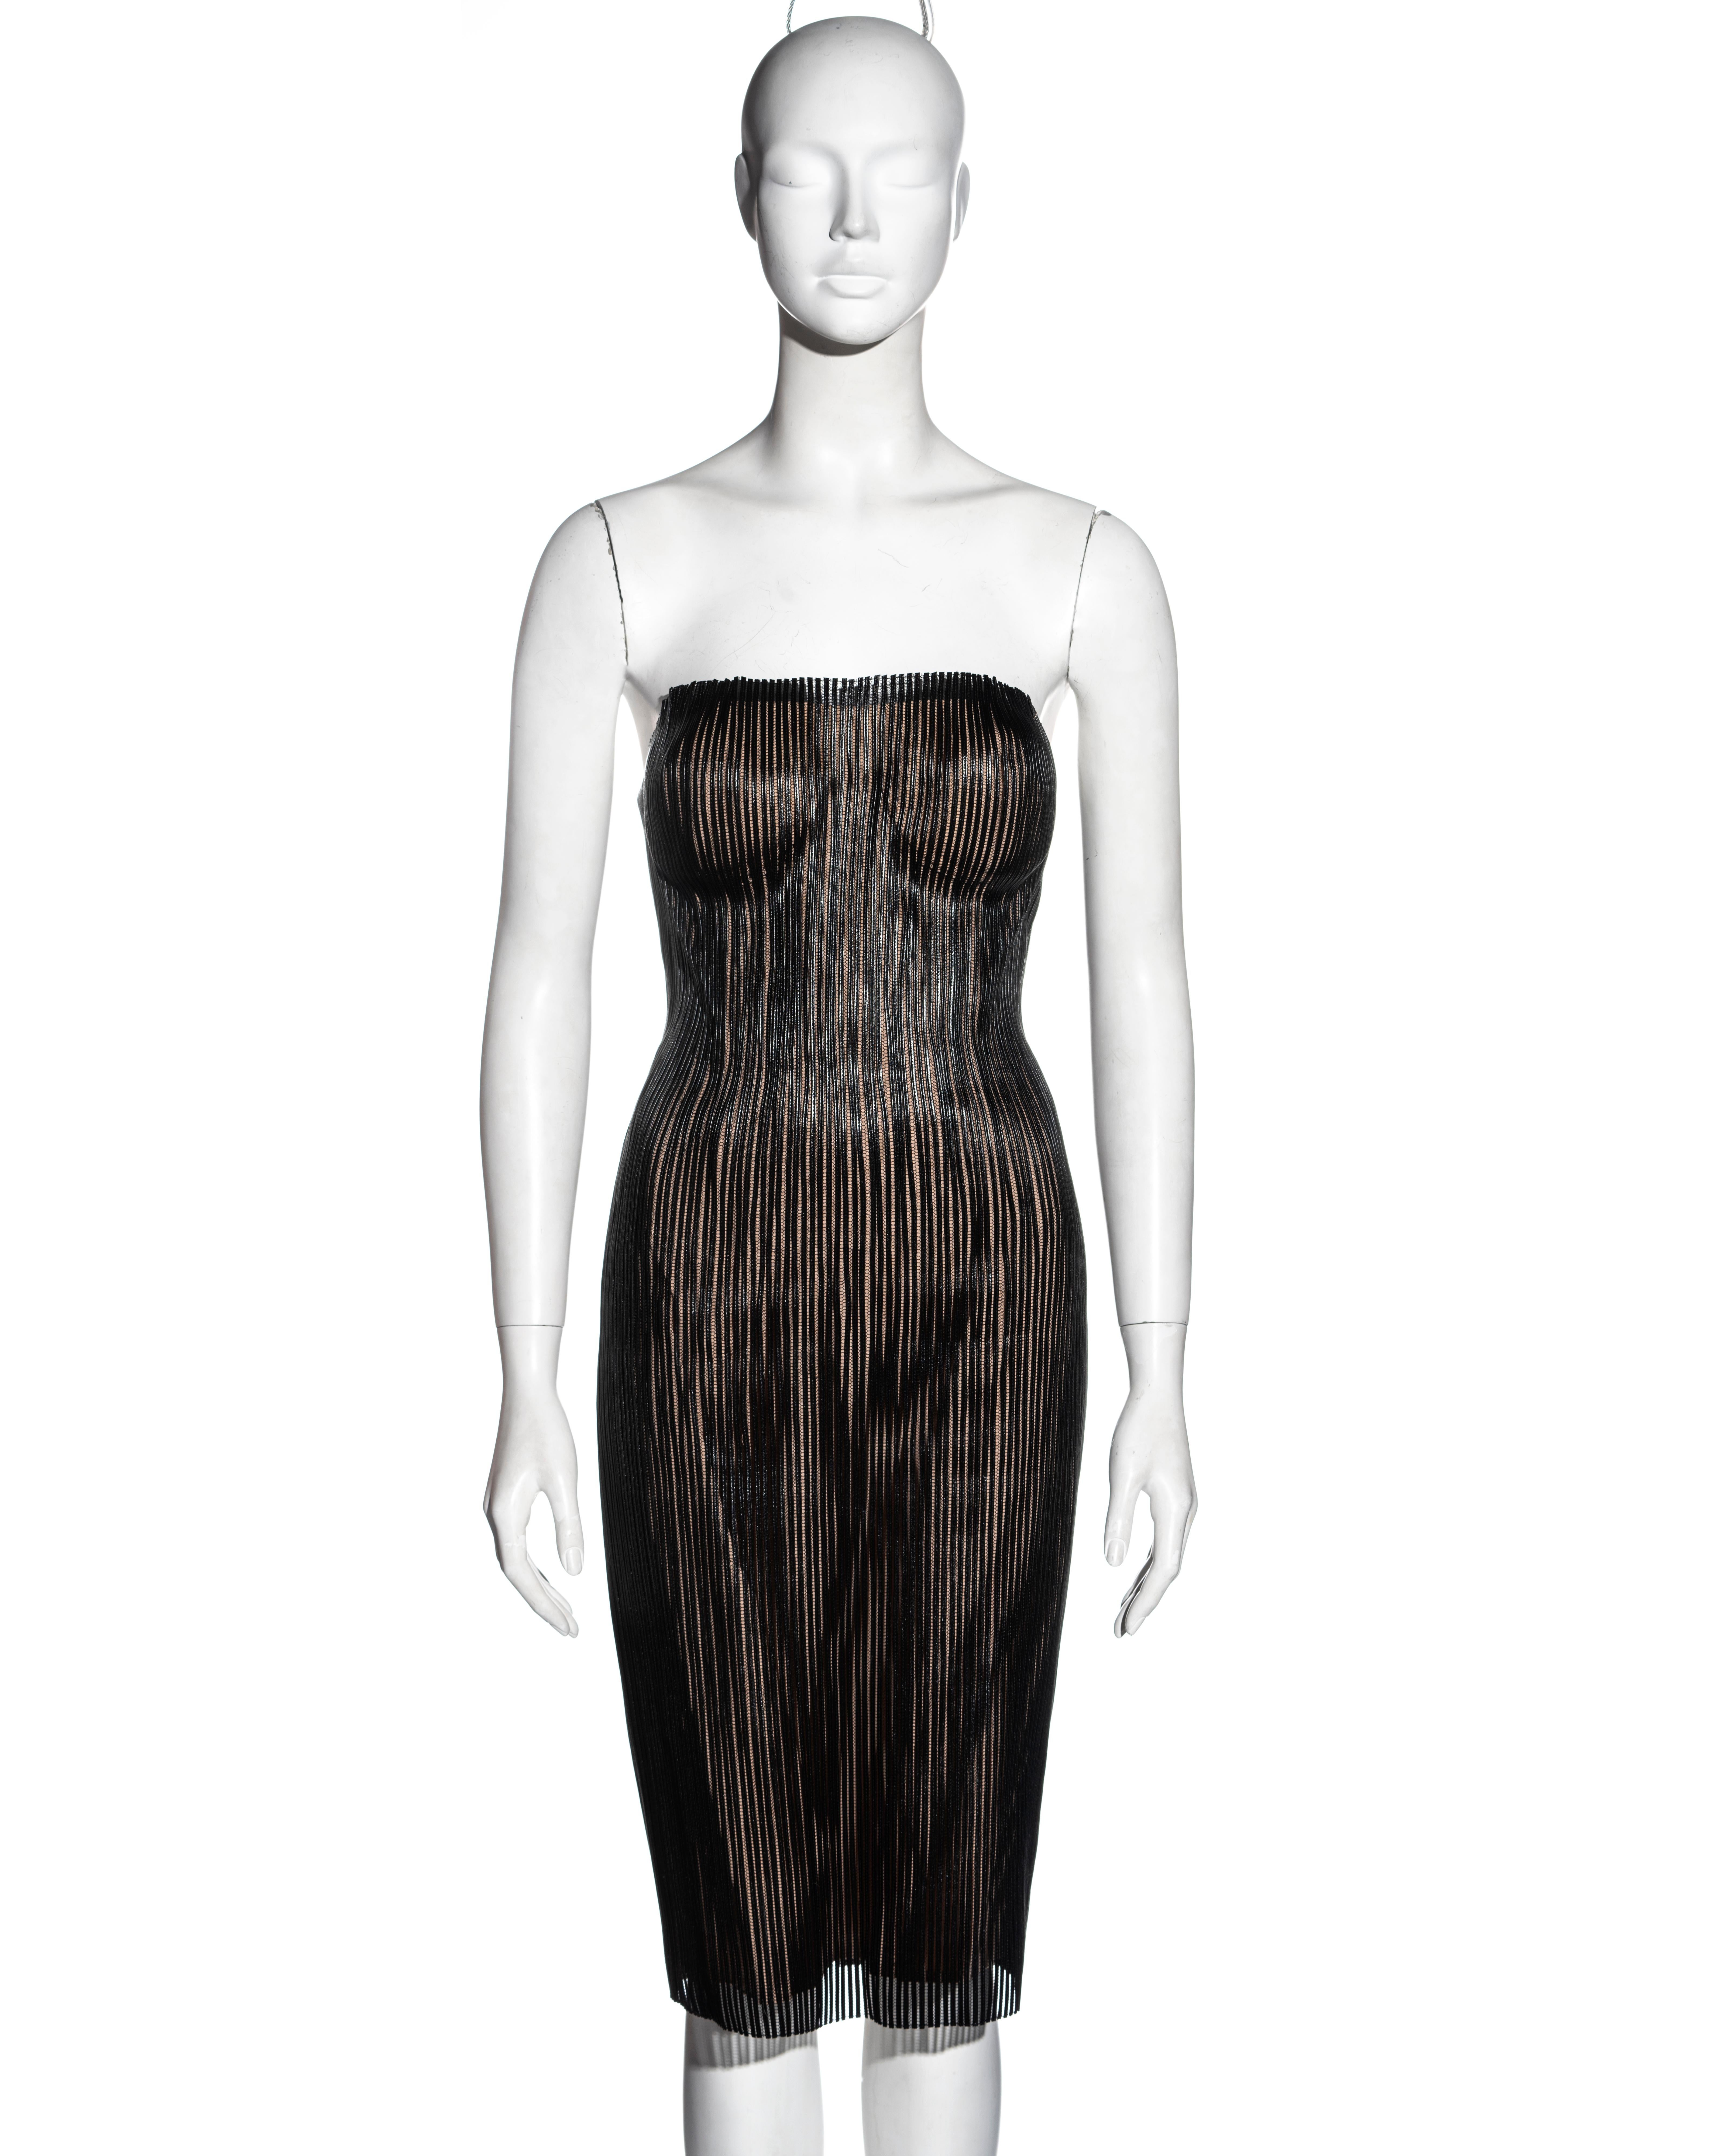 ▪ Gucci black leather strapless dress
▪ Designed by Tom Ford
▪ Made up of vertically cut strips of leather
▪ Built-in corset 
▪ Nude lining 
▪ No size label approx. IT 44 - FR 40 - UK 12 - US 8
▪ Spring-Summer 2001
▪ 100% Leather
▪ Made in Italy